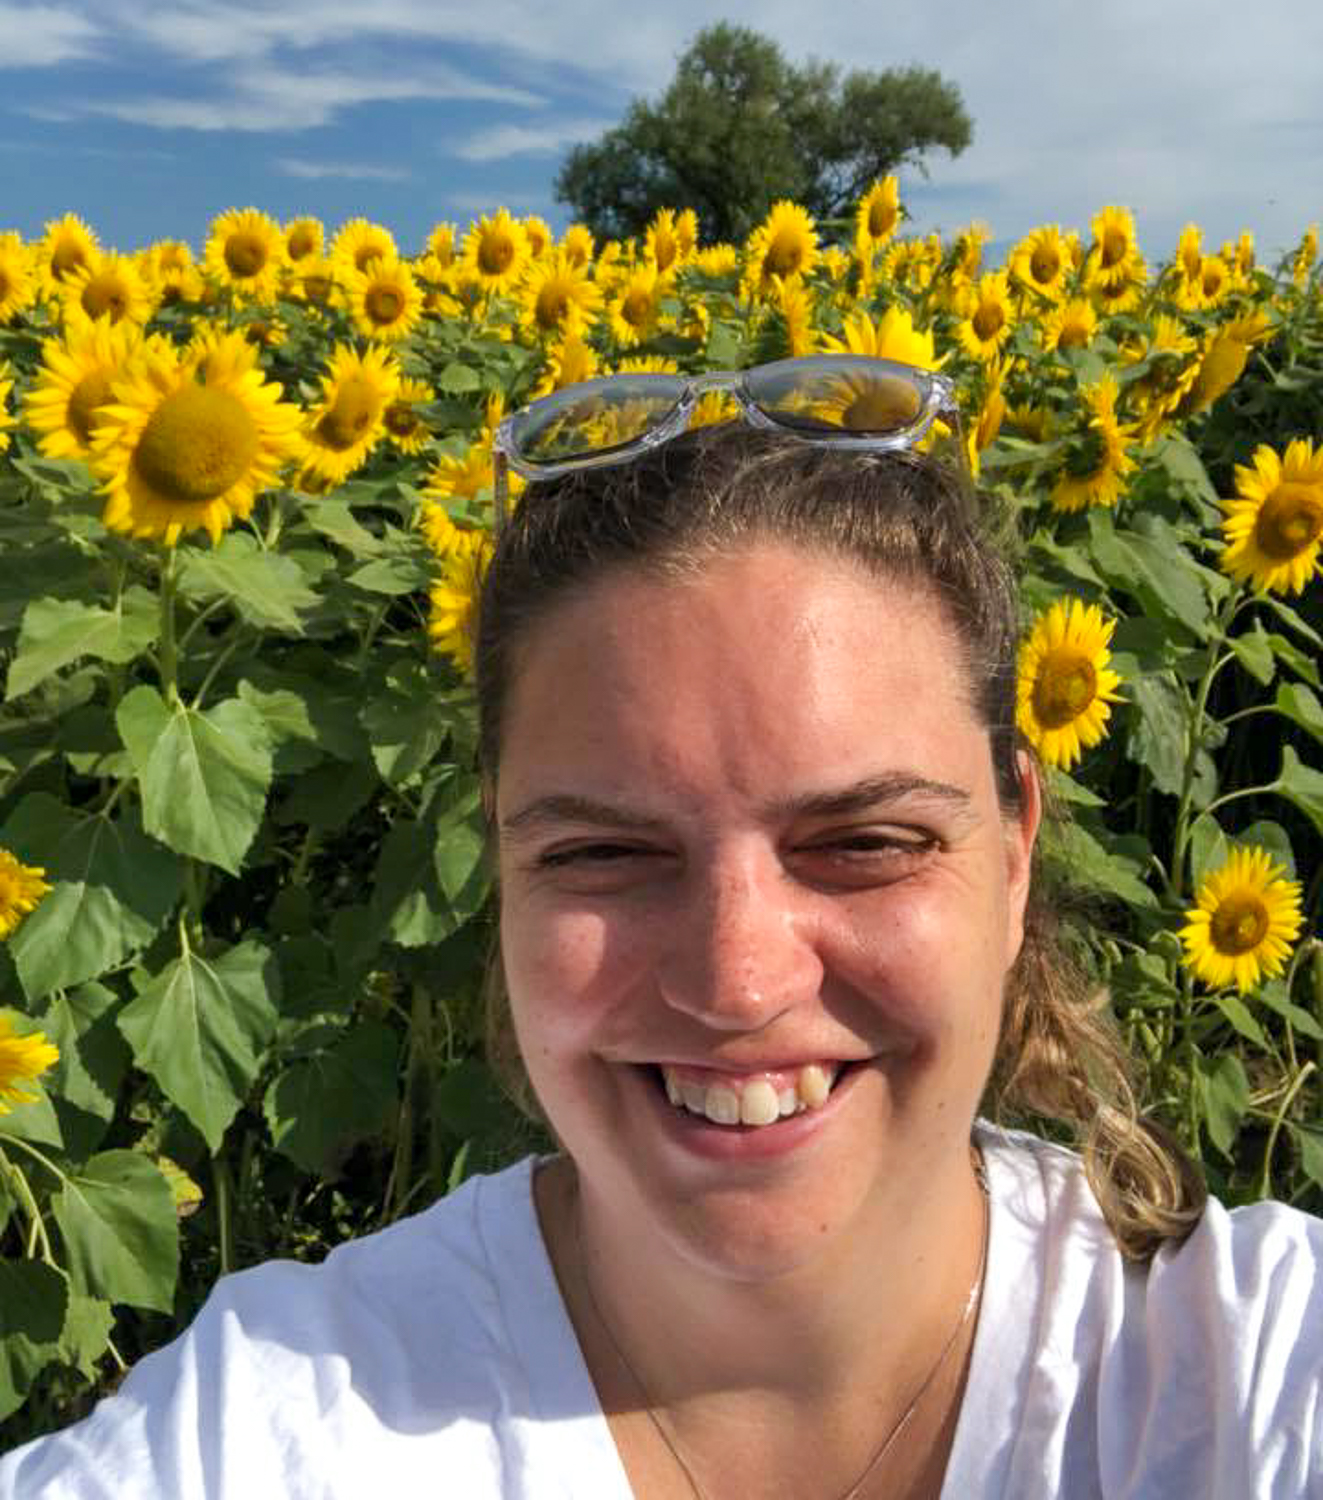 Kate Contini selfie in field of sunflowers